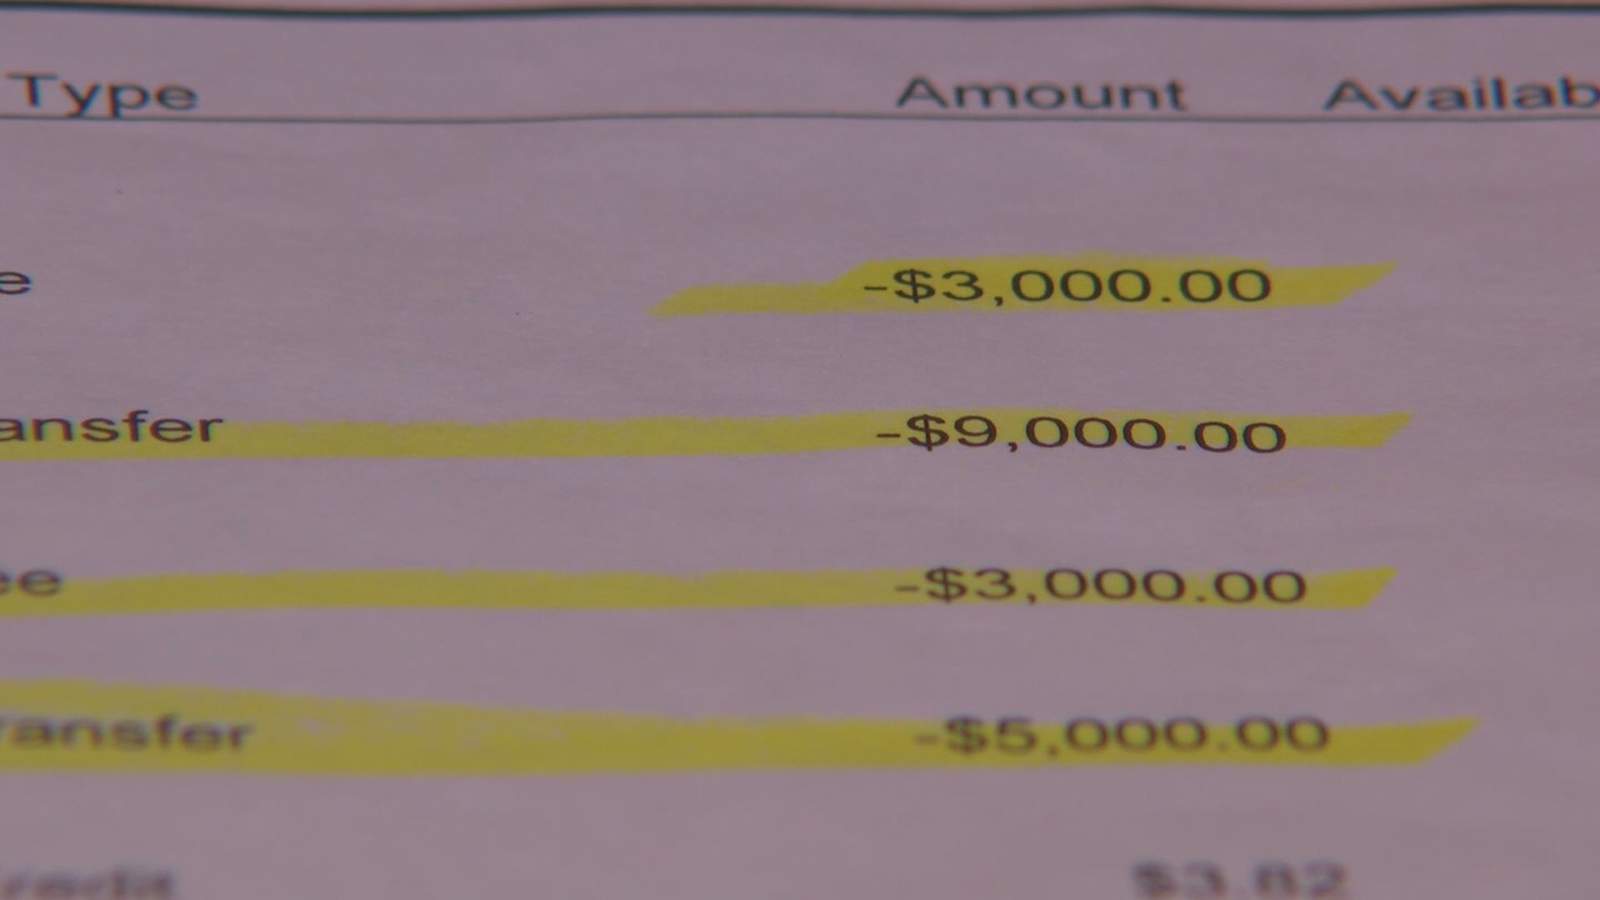 'We fell for it’: Retired couple duped out of $20K by woman claiming to be their granddaughter